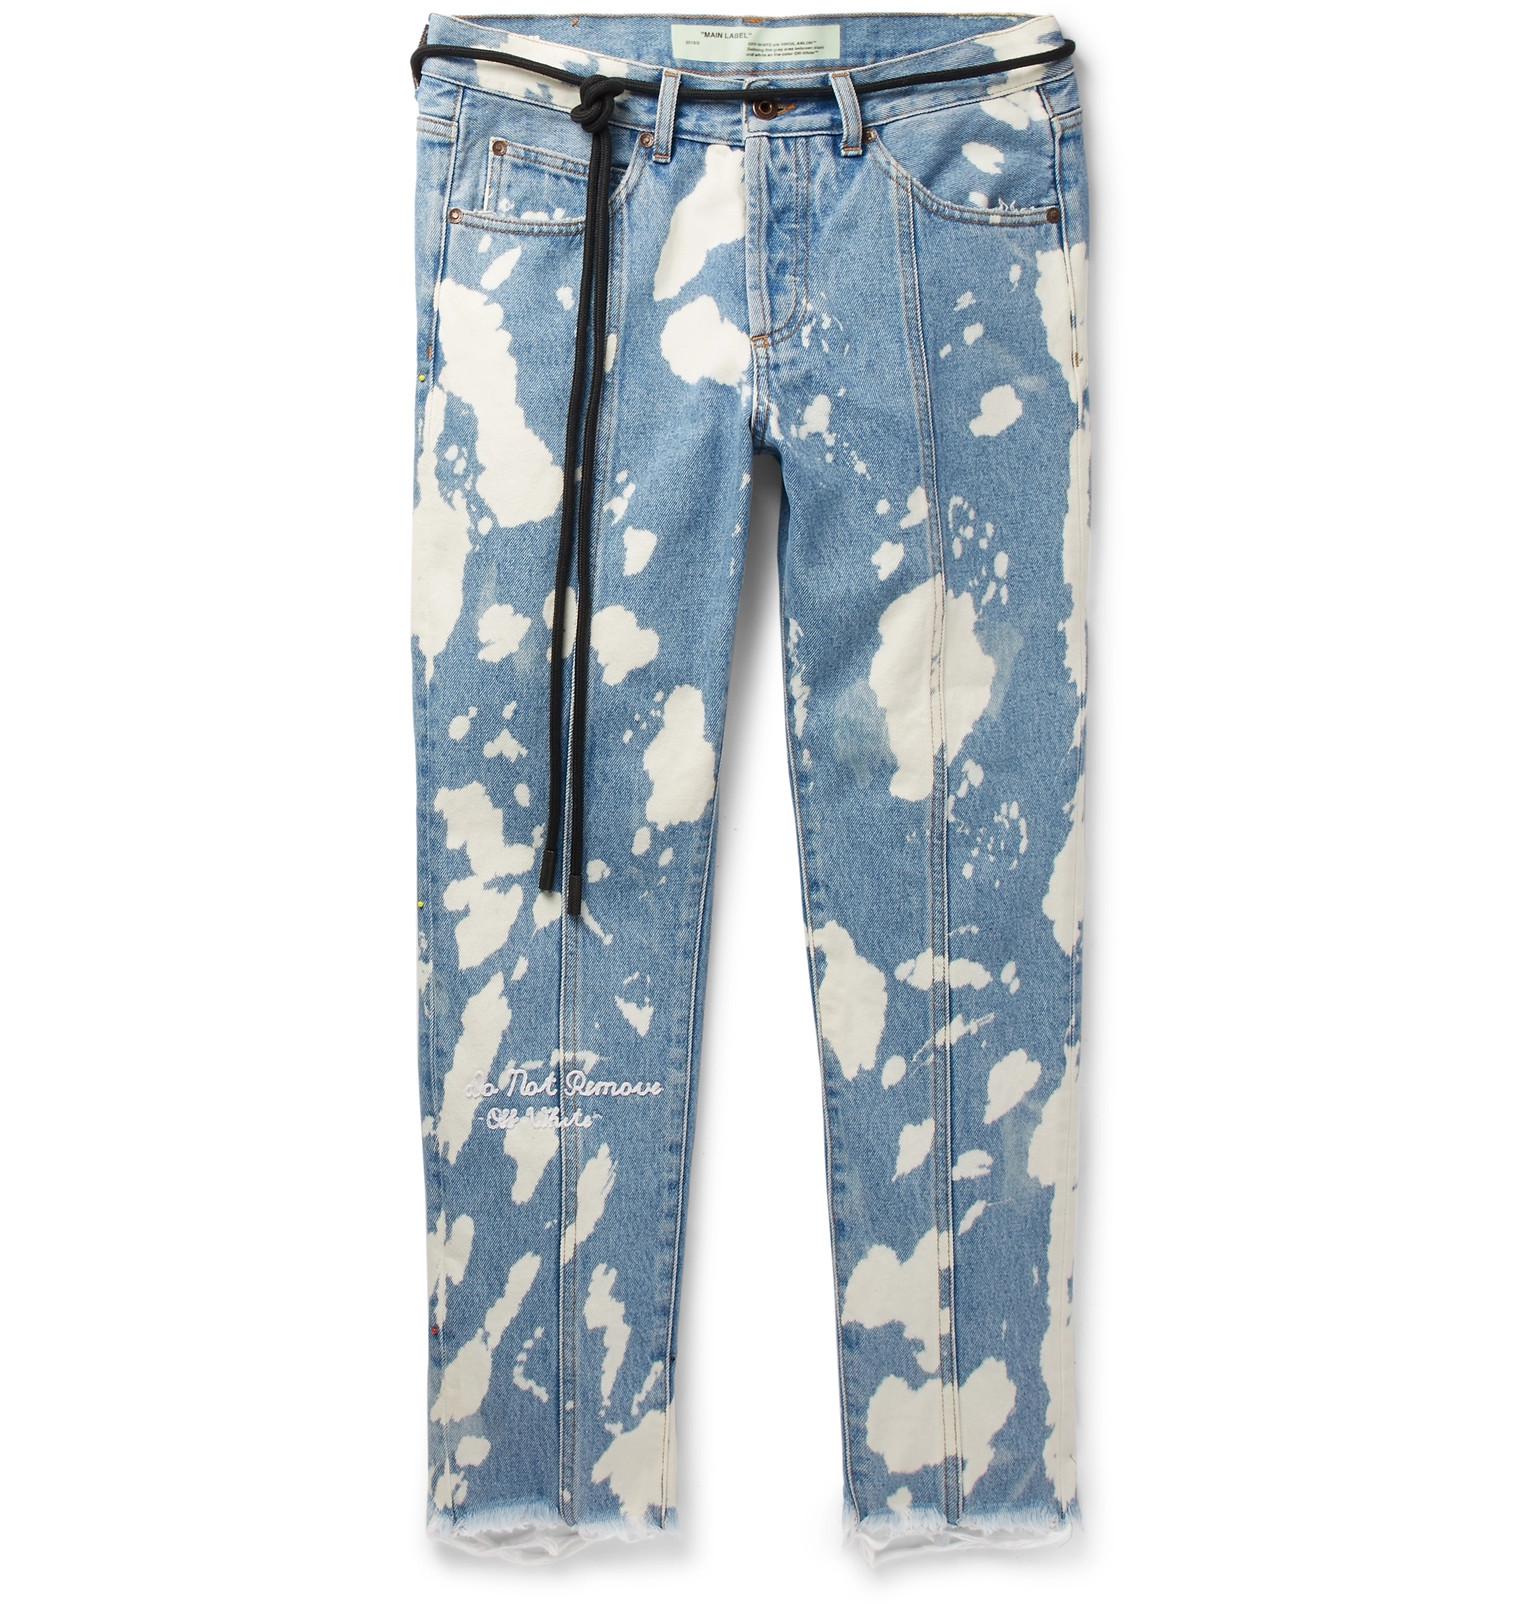 Off-White c/o Virgil Abloh Slim-fit Cropped Distressed Bleached Denim Jeans  in Blue for Men - Lyst